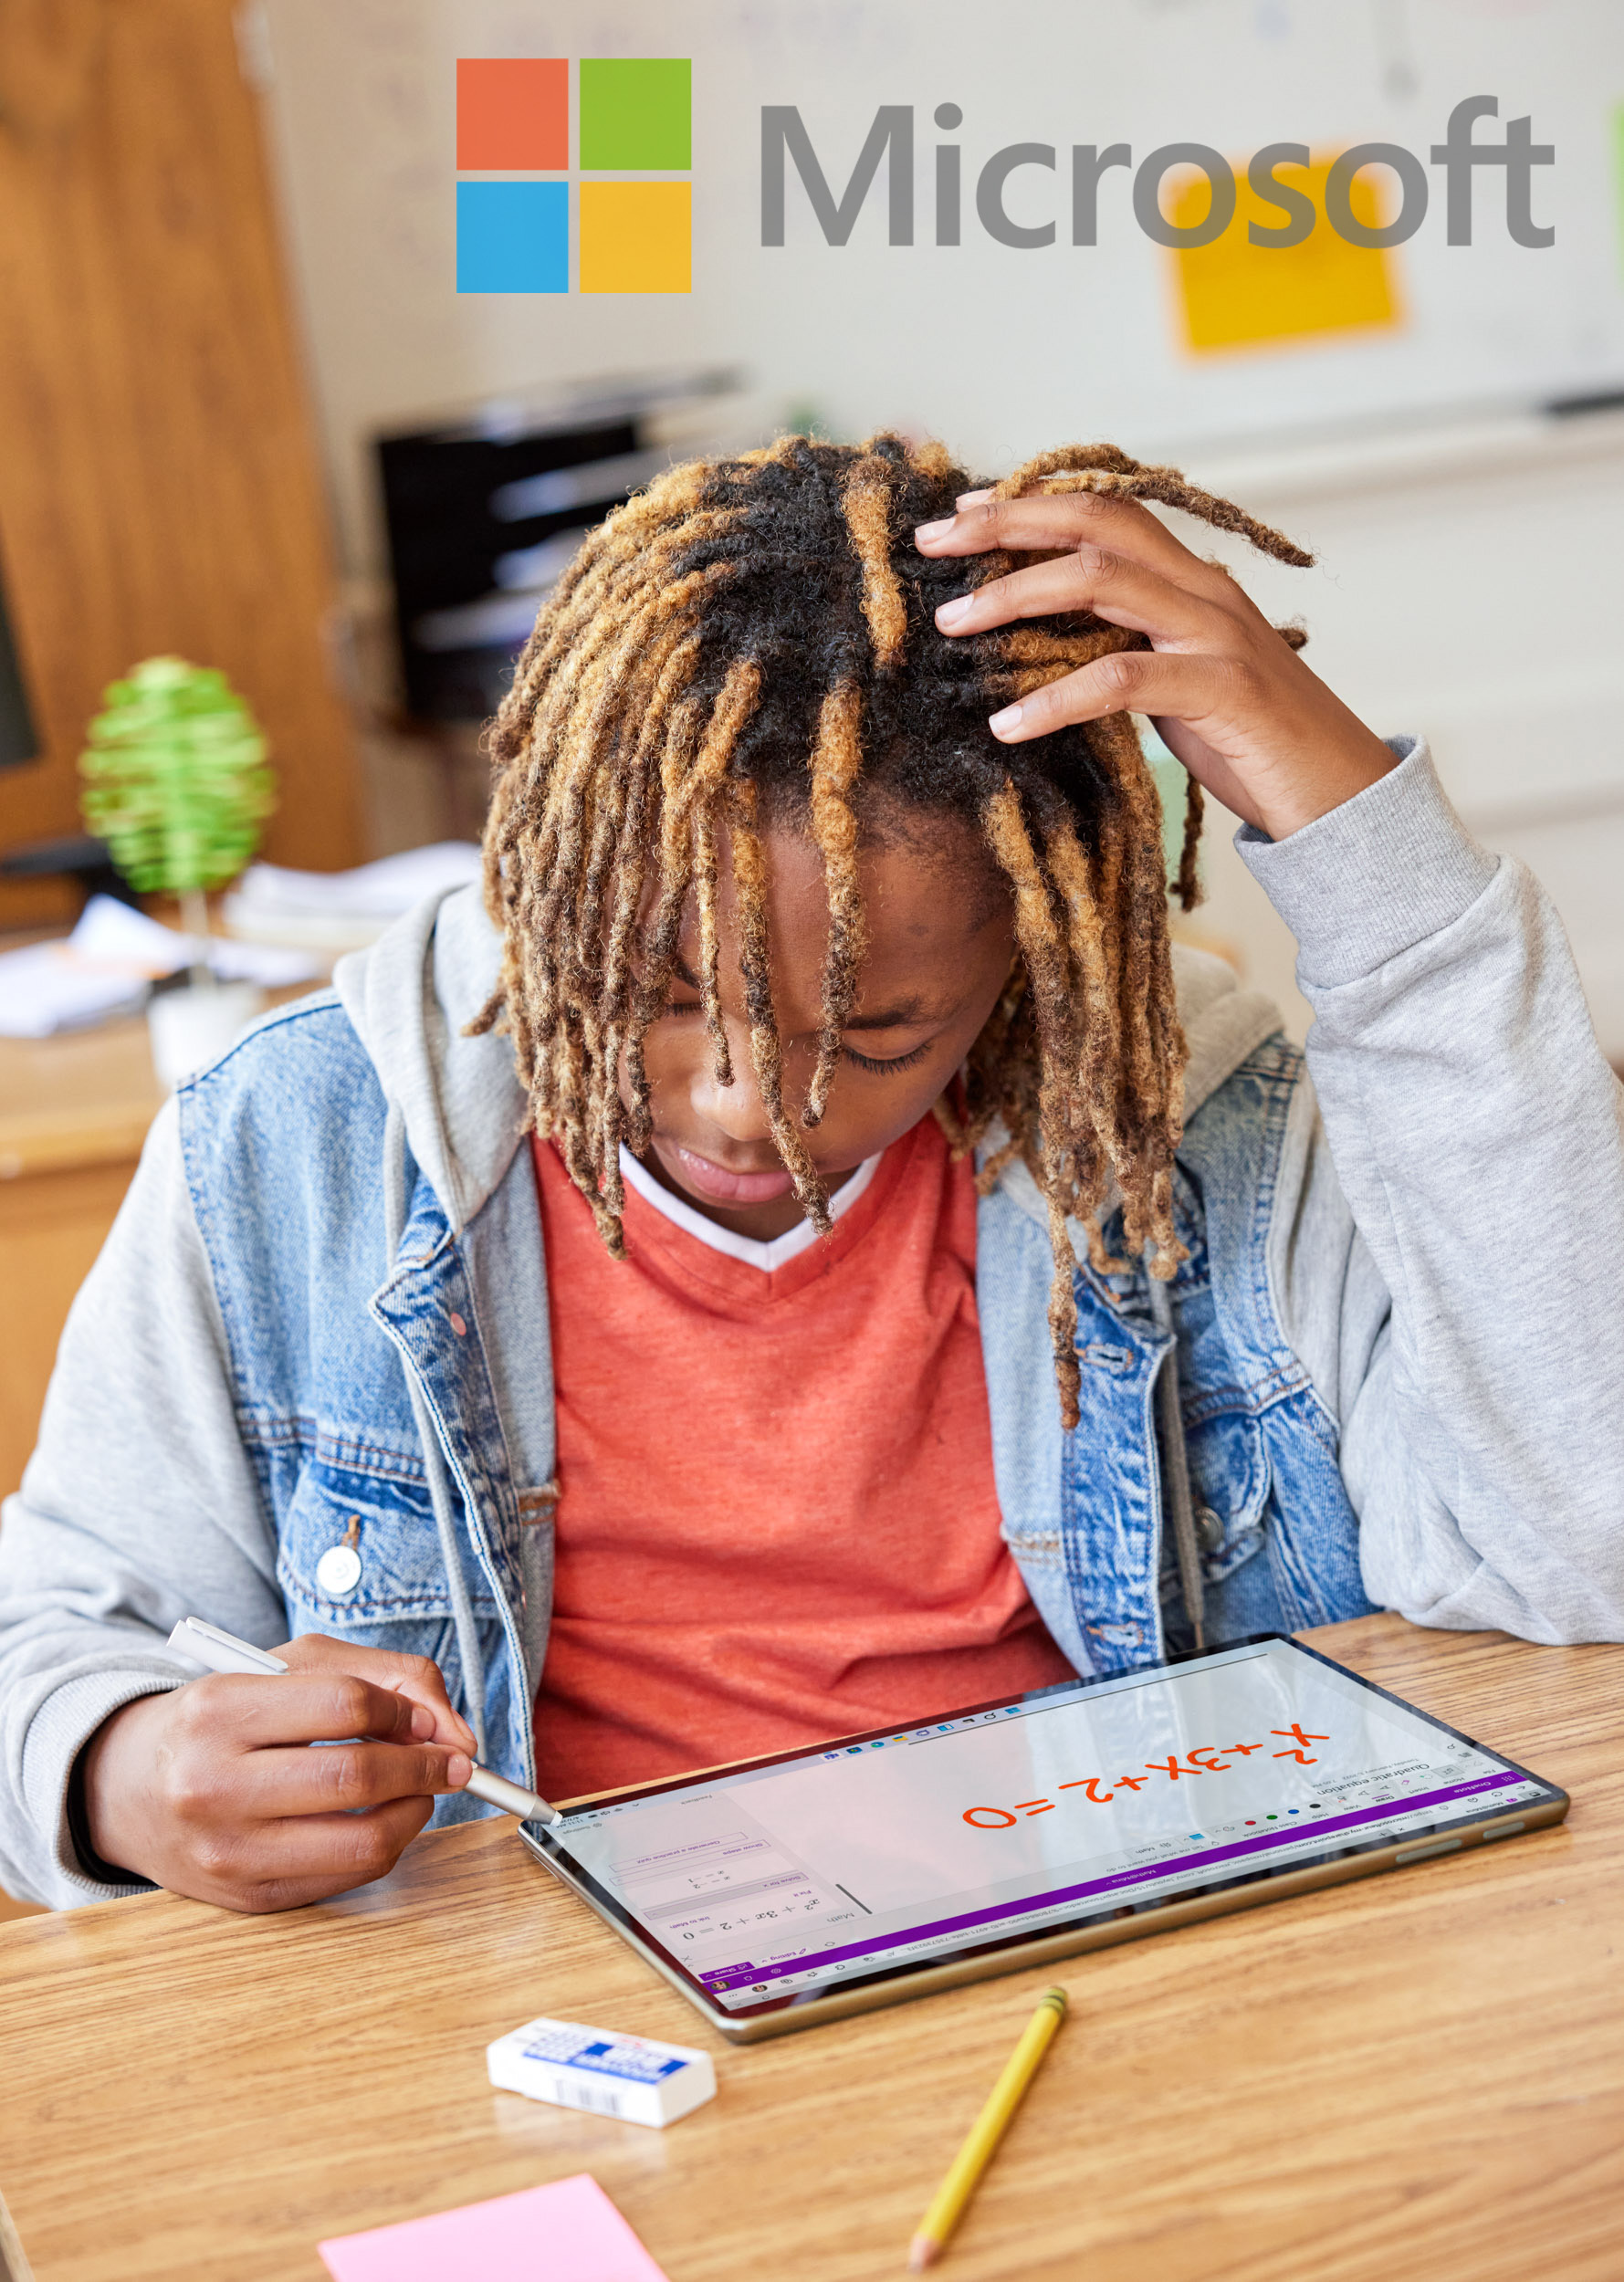 A high school student works with new tech in a Microsoft Ad Campaign photographed by Lifestyle Photographer Diana Mulvihill